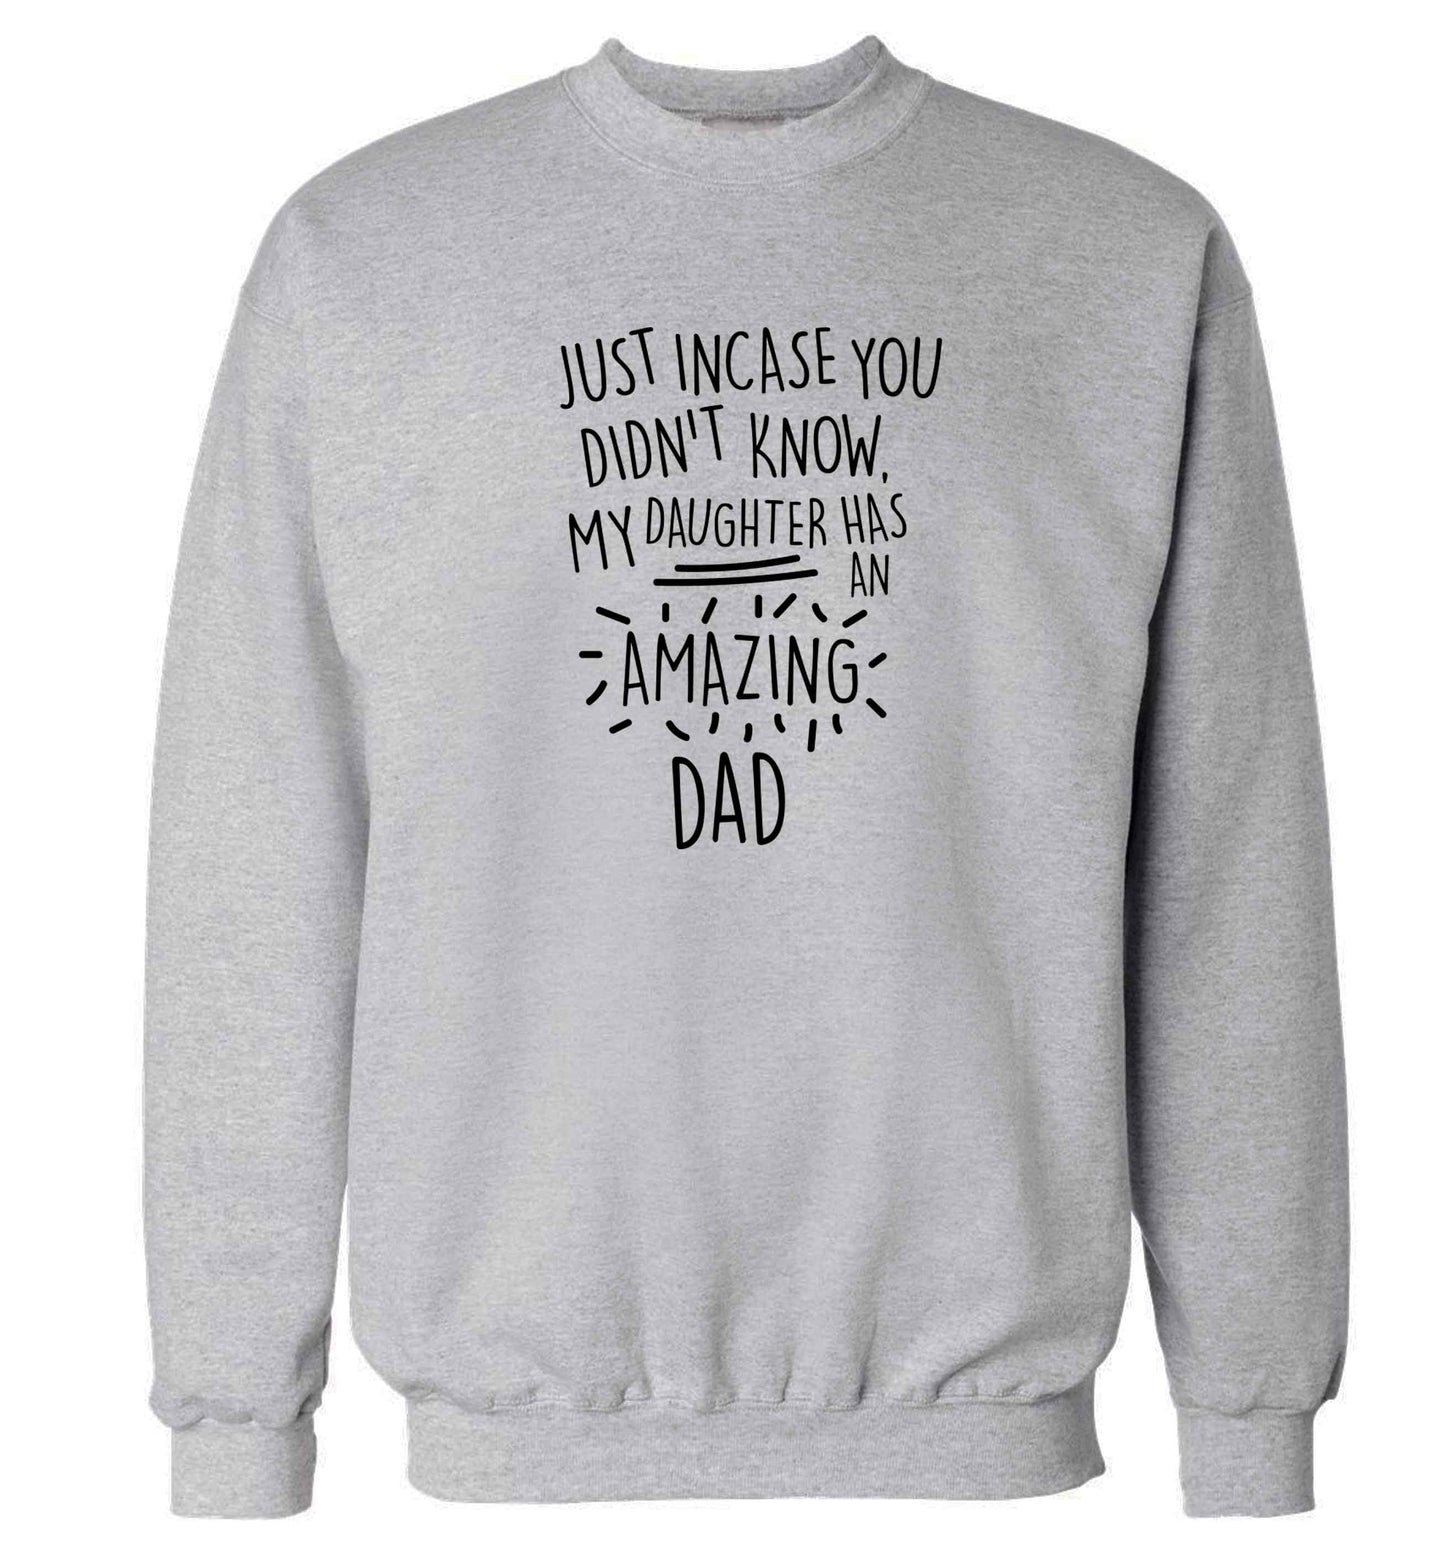 Just incase you didn't know my daughter has an amazing dad adult's unisex grey sweater 2XL